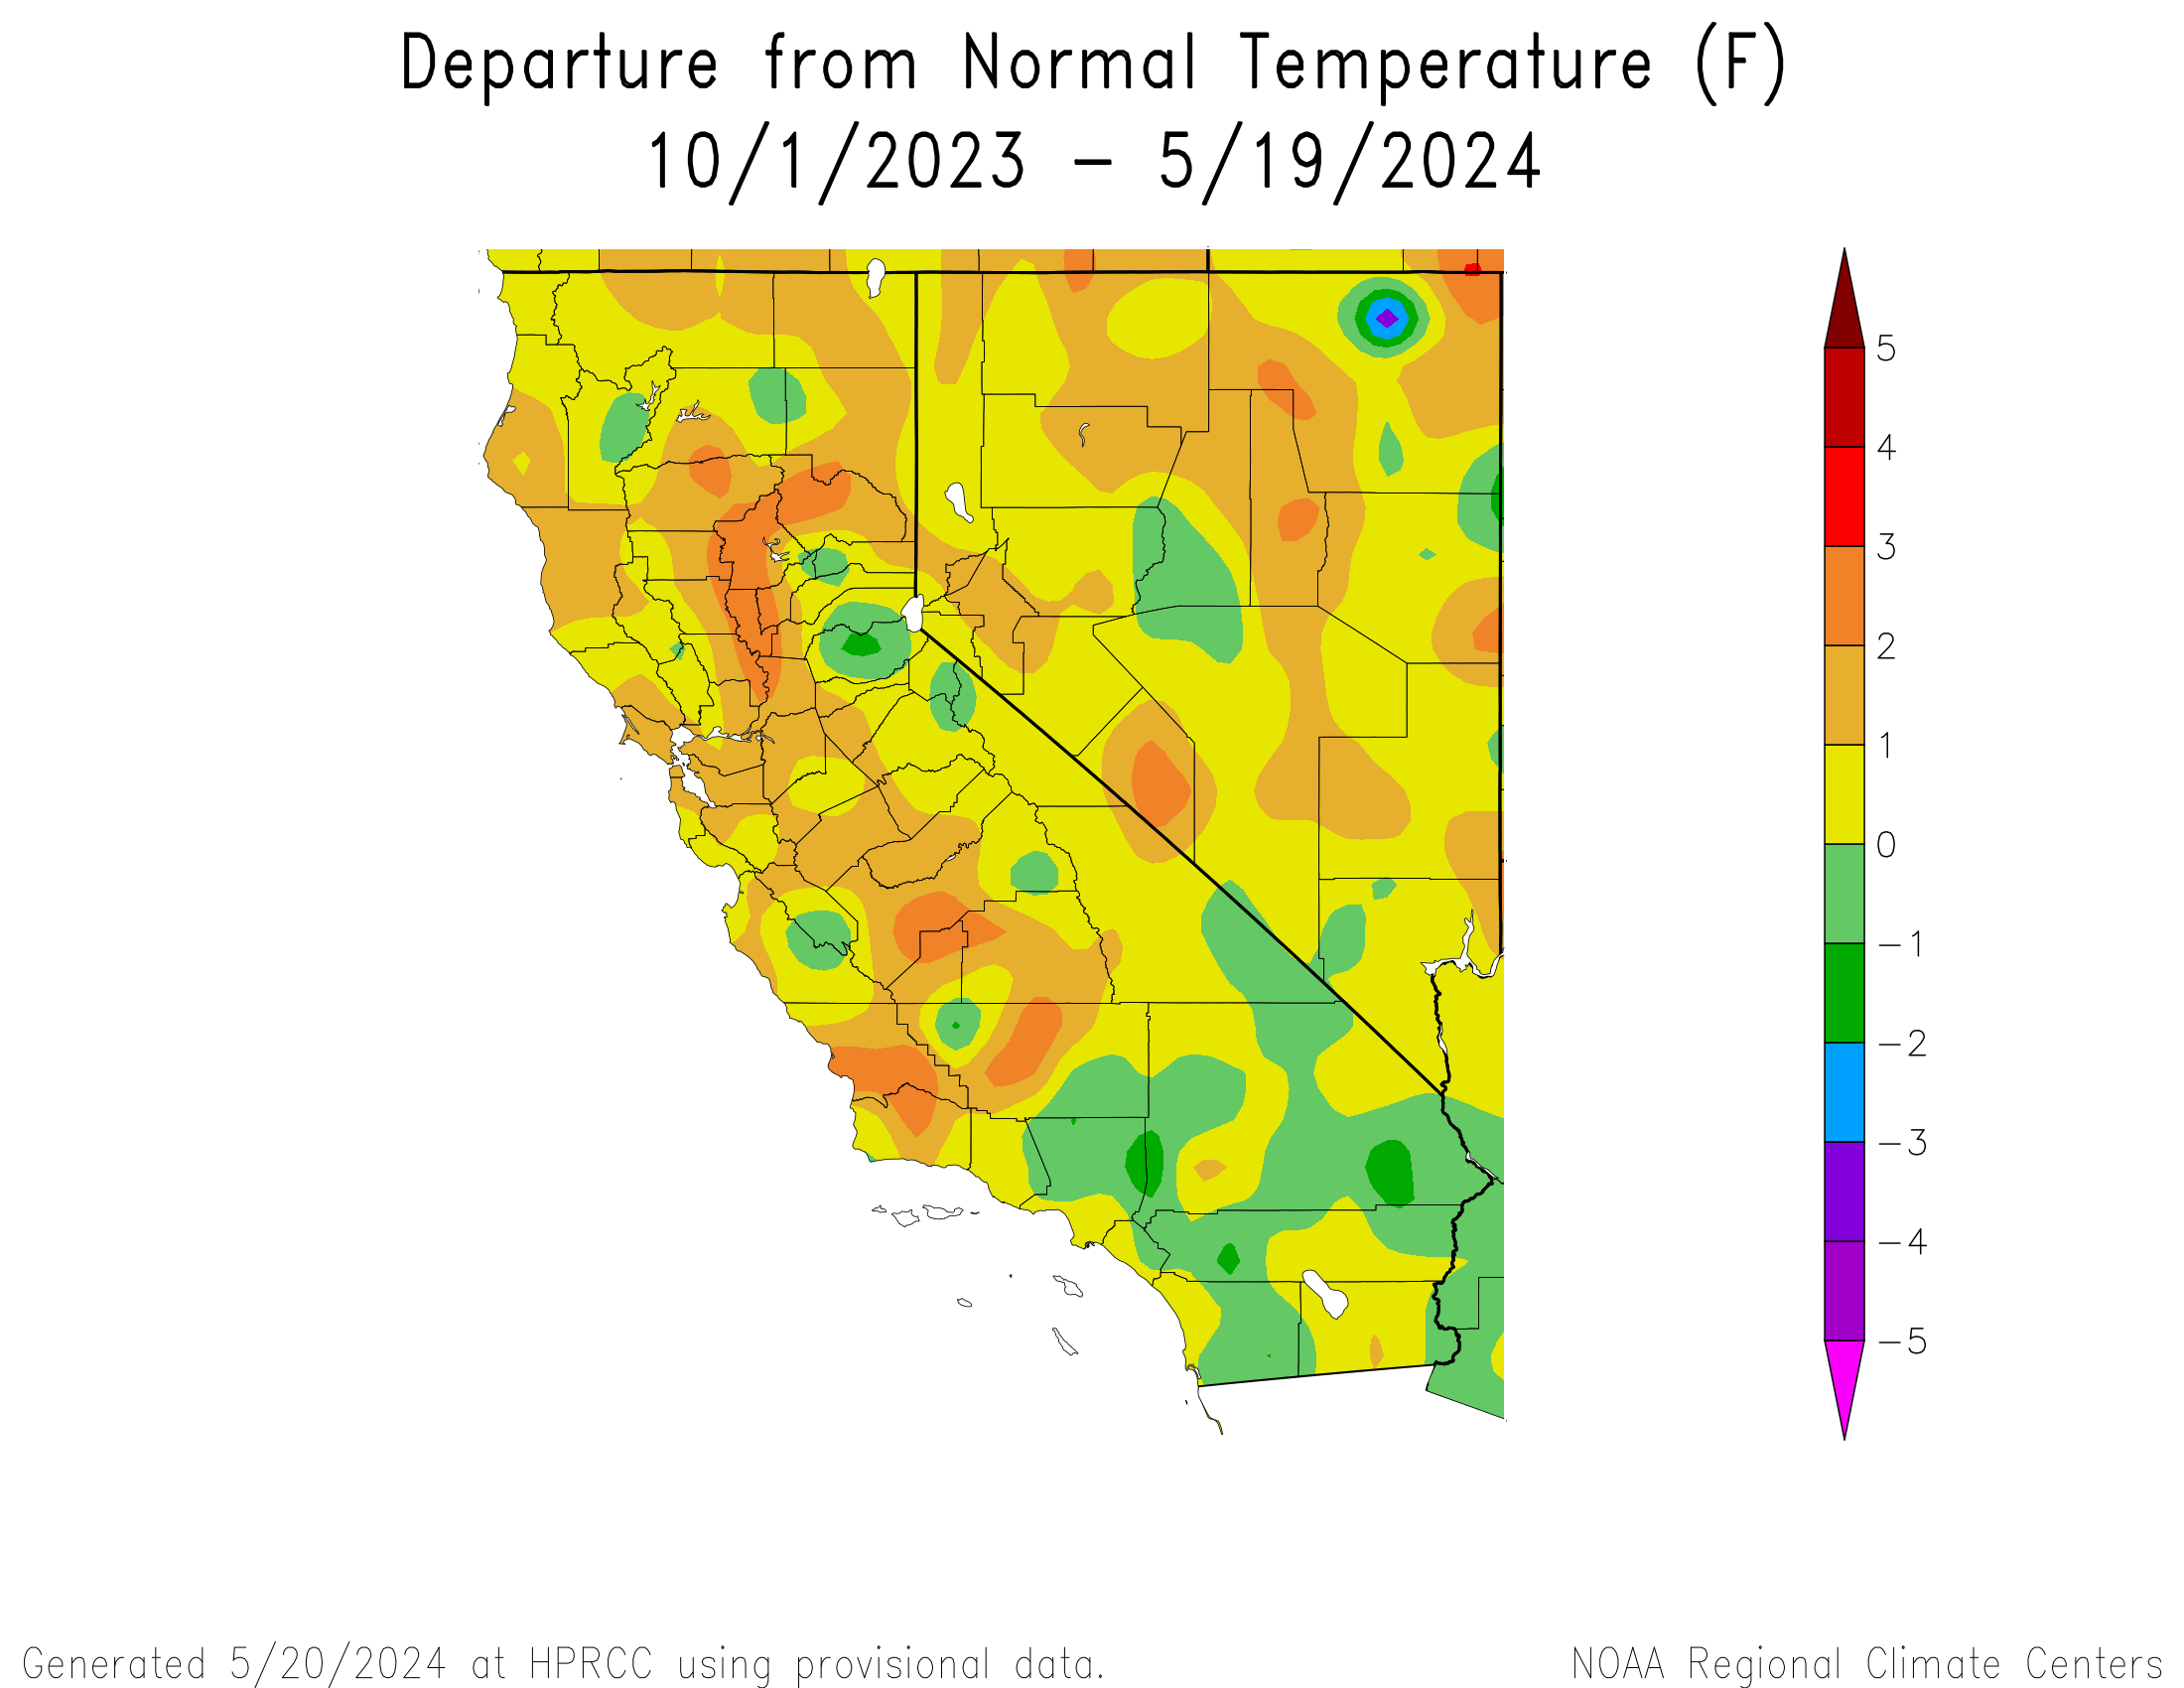 Departure from Normal Temperature for California